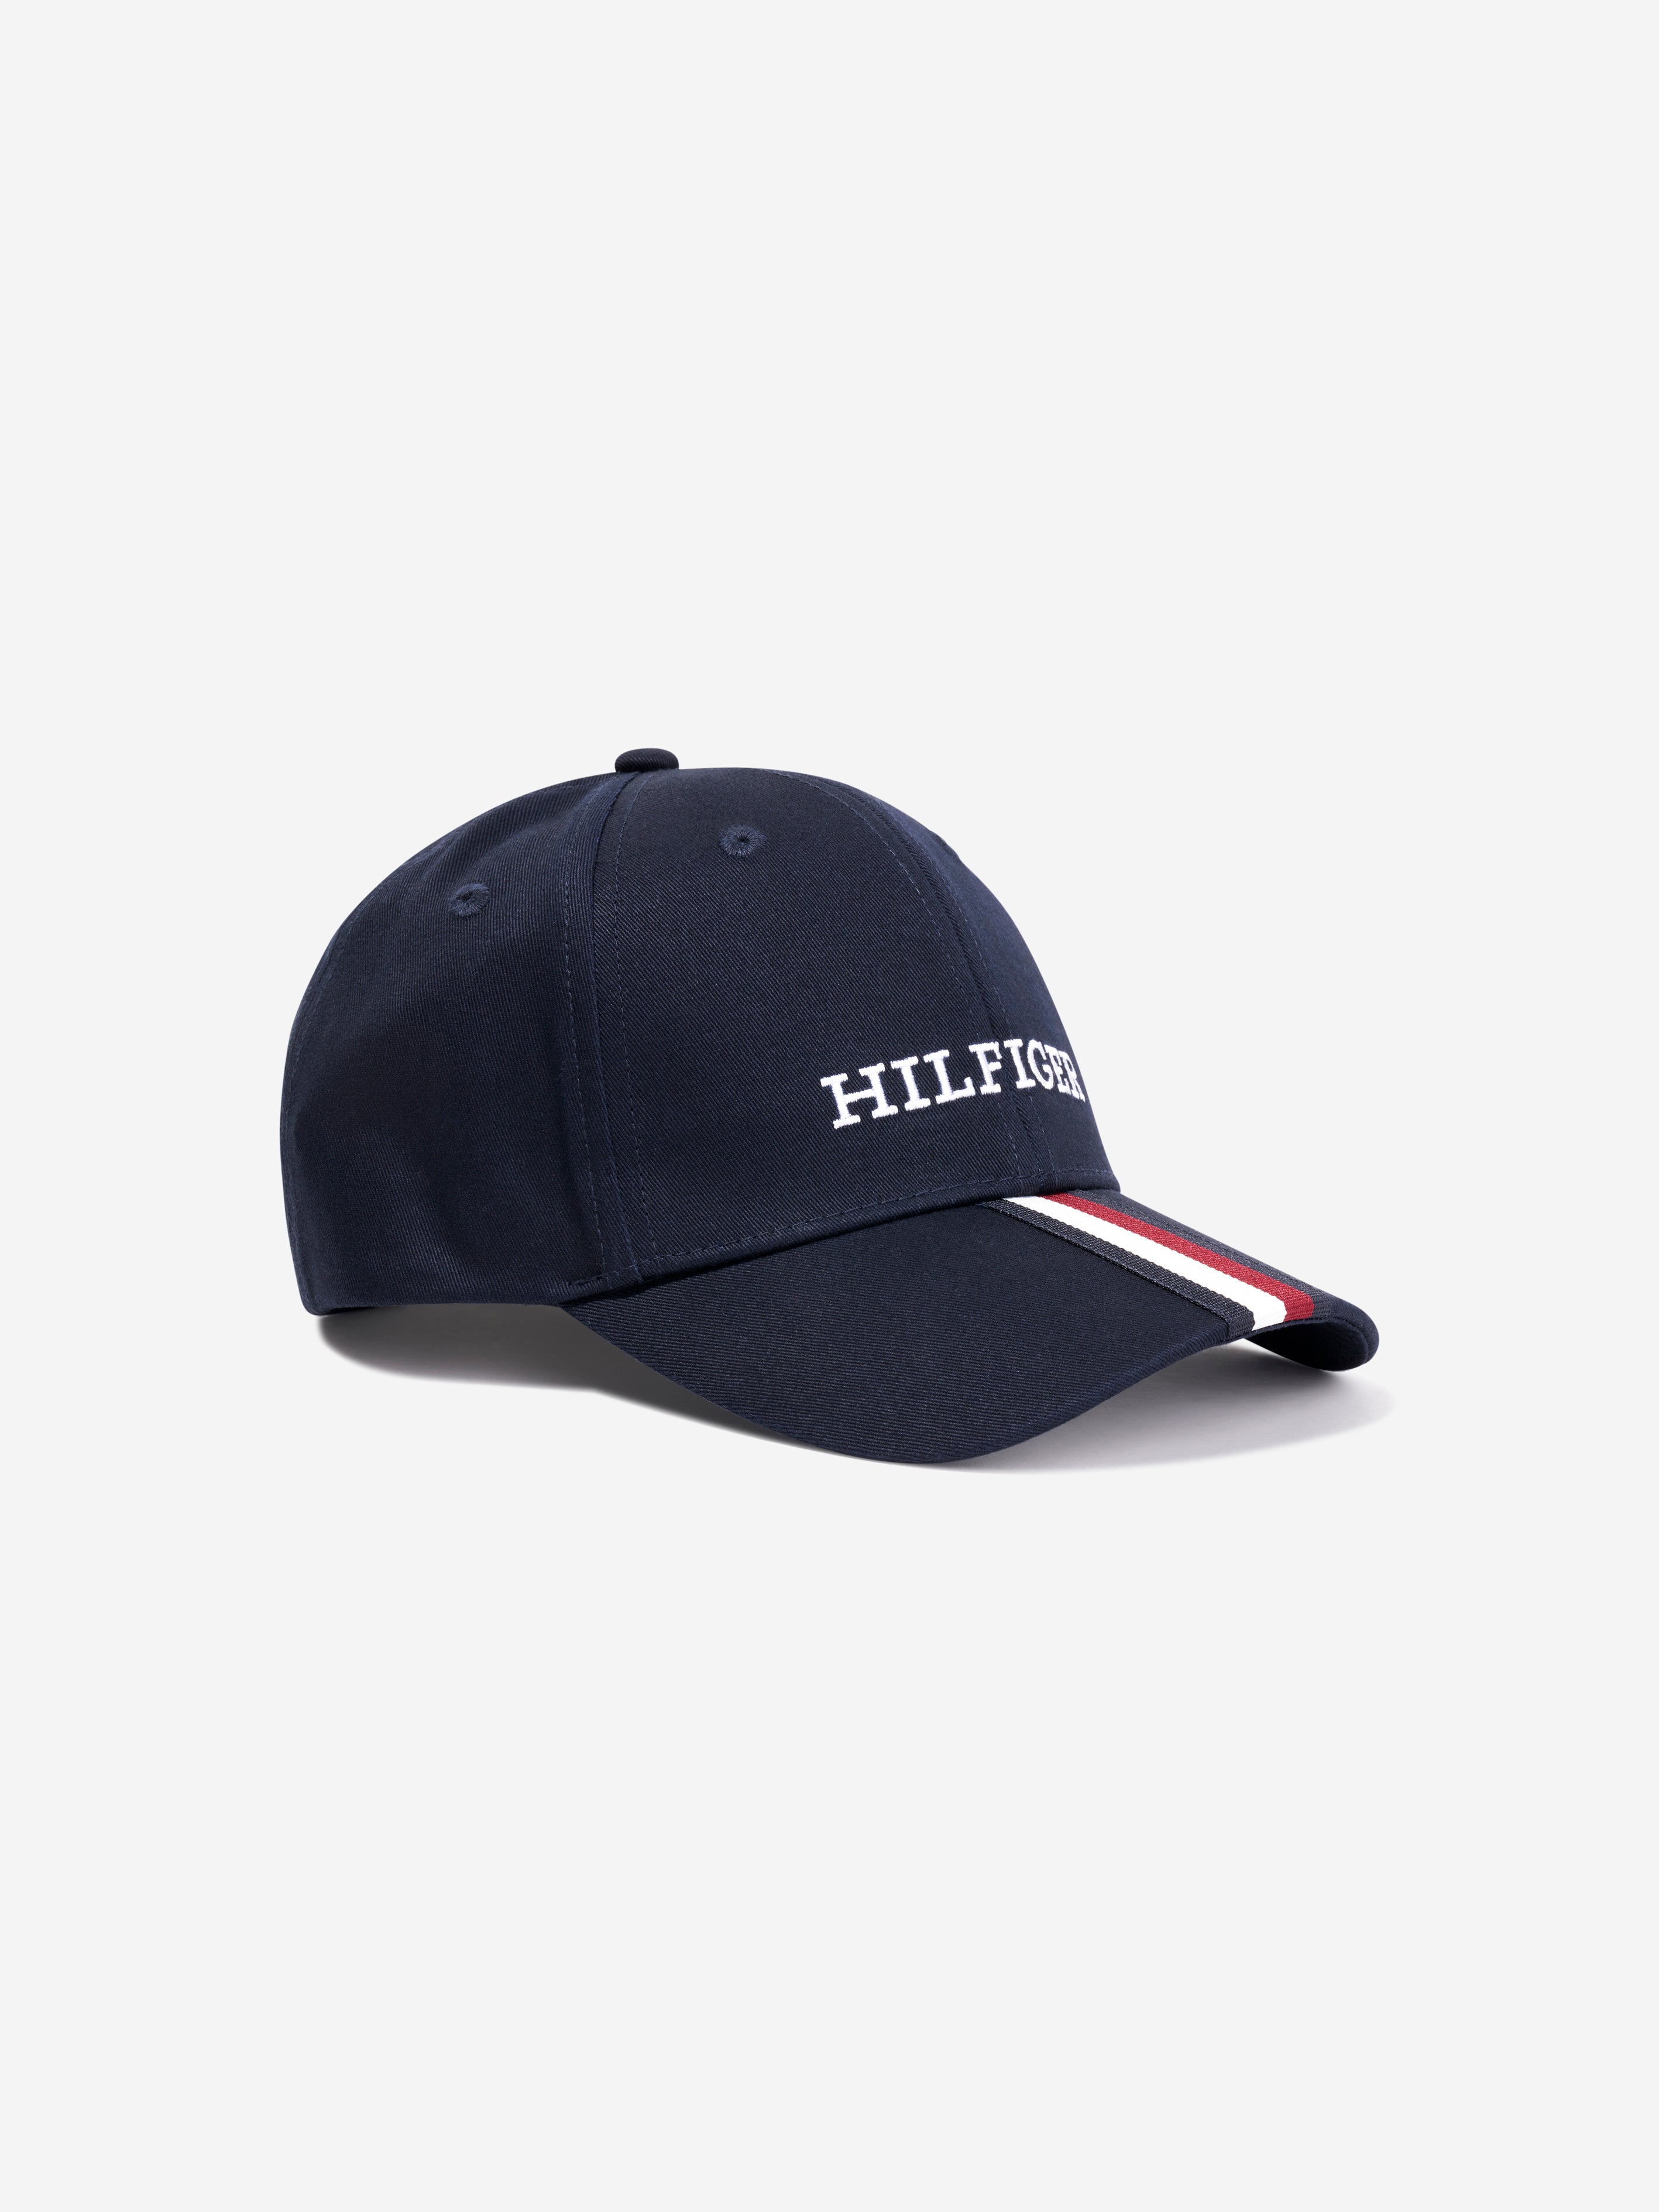 Tommy Hilfiger Kids Corporate Hilfiger Navy Clothing in Cap Childsplay 